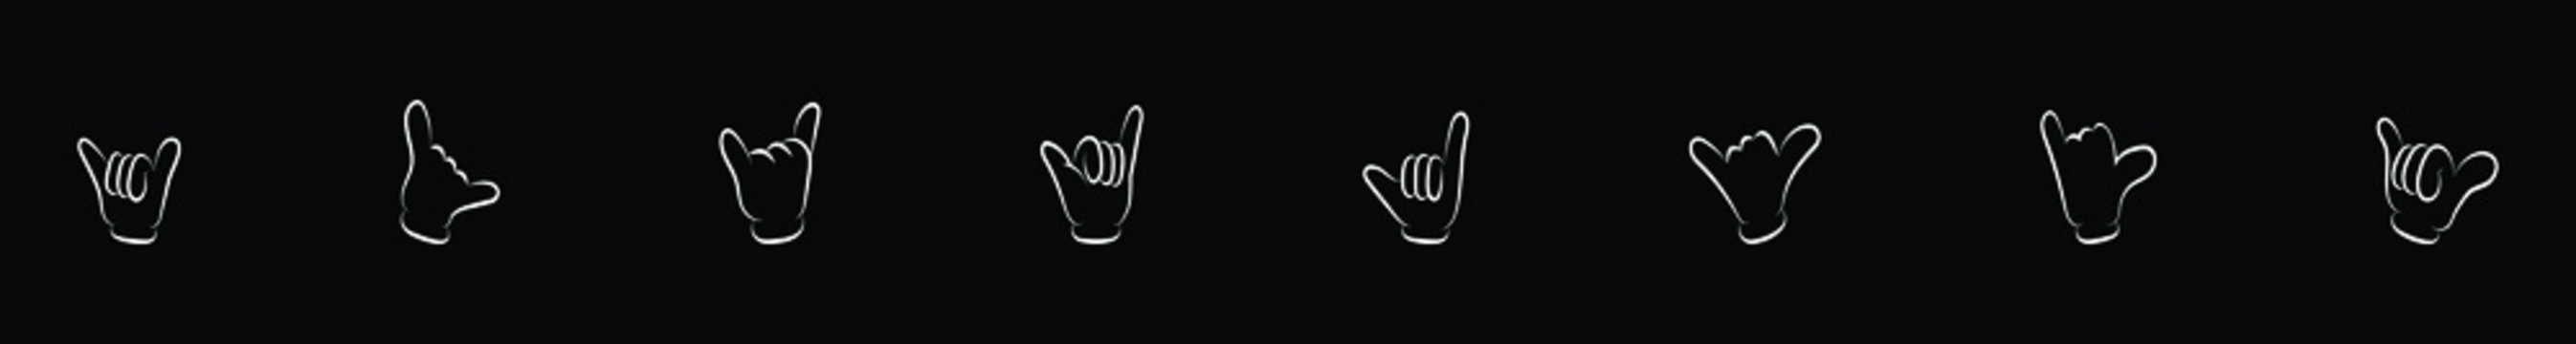 set of shaka hand gesture cartoon icon design template with various models. vector illustration